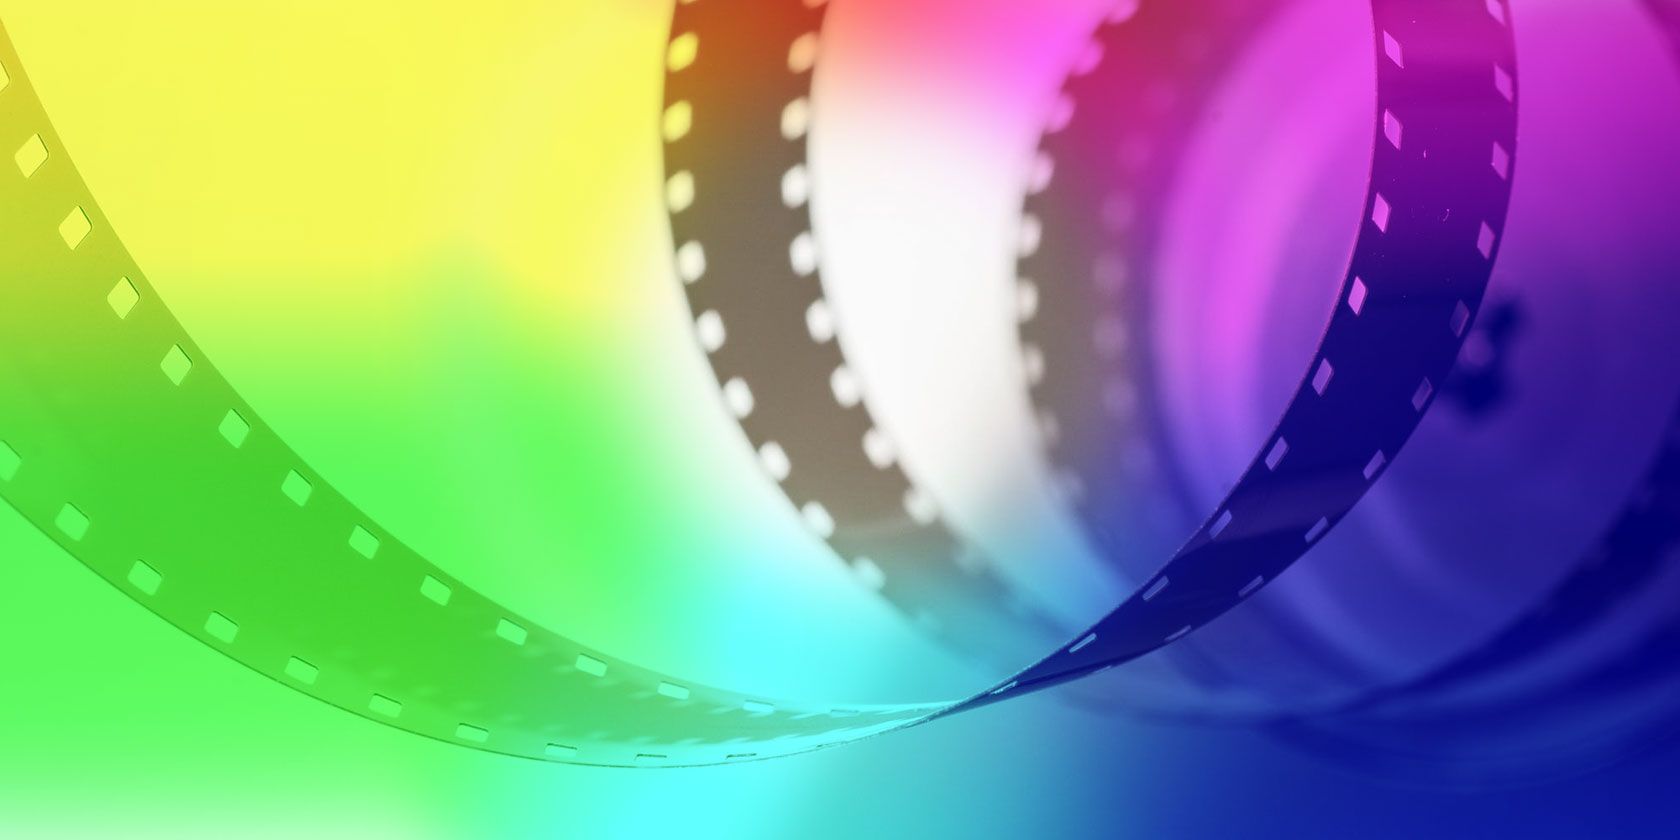 Swirling filmstock over a multicolored background